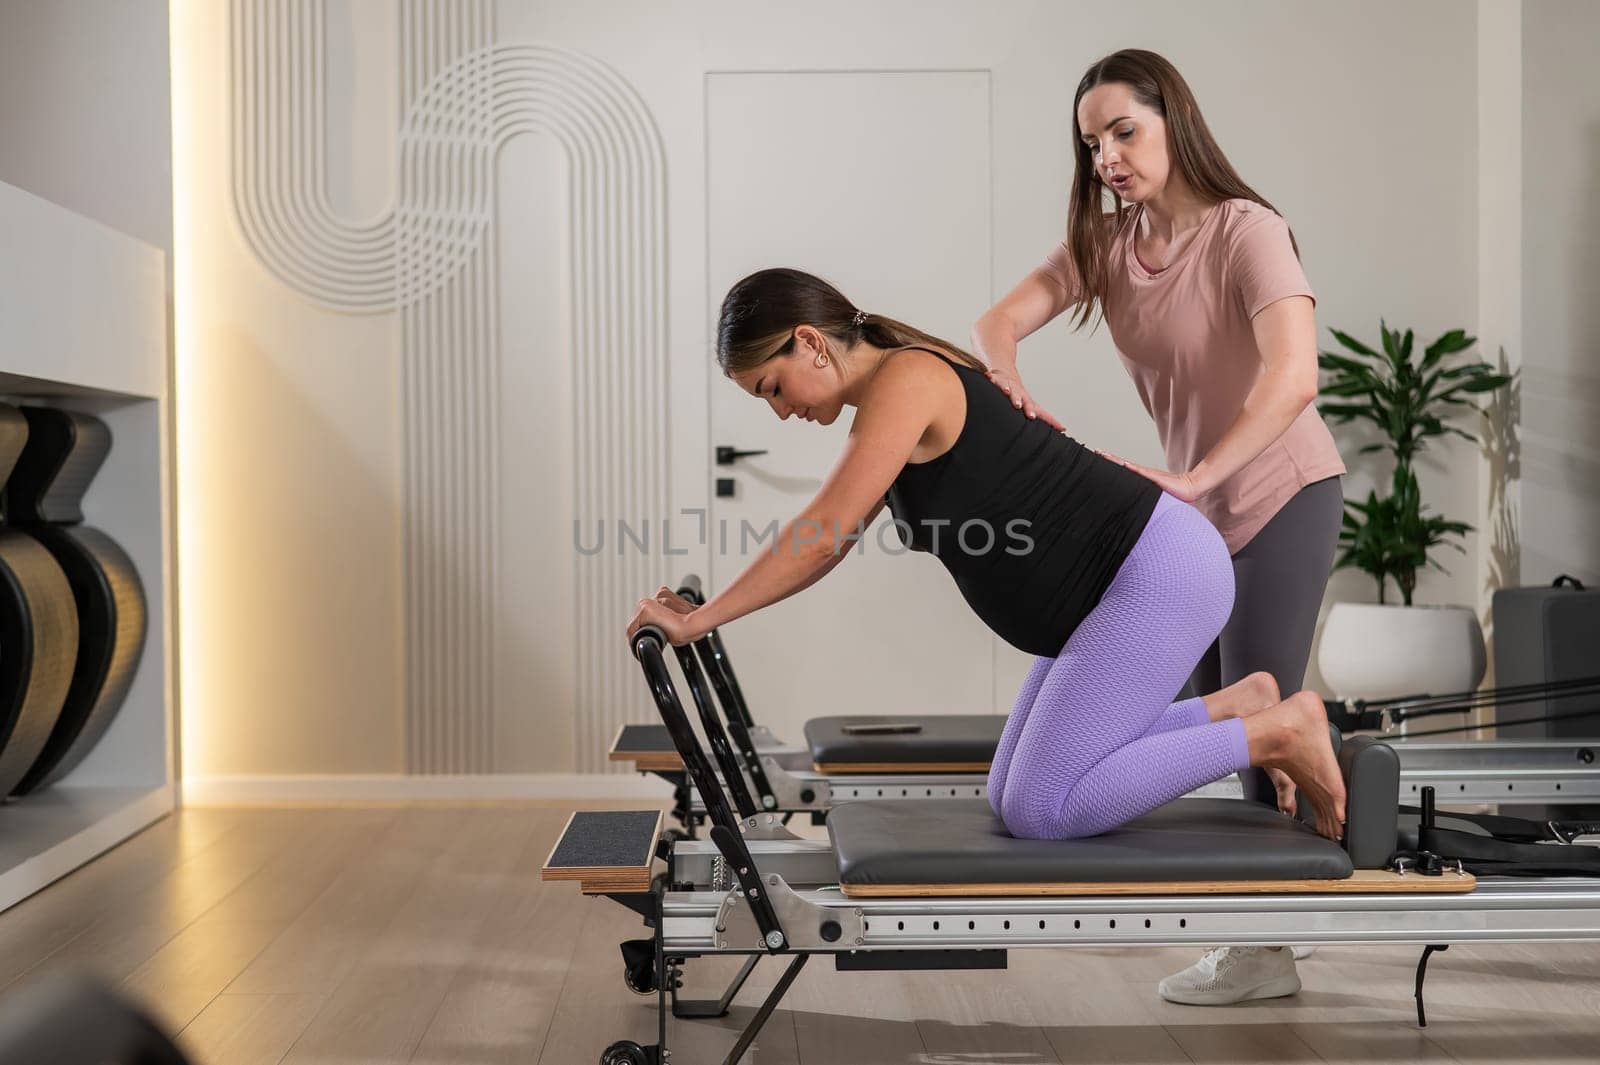 A pregnant woman works out on a reformer exercise machine with a personal trainer. by mrwed54